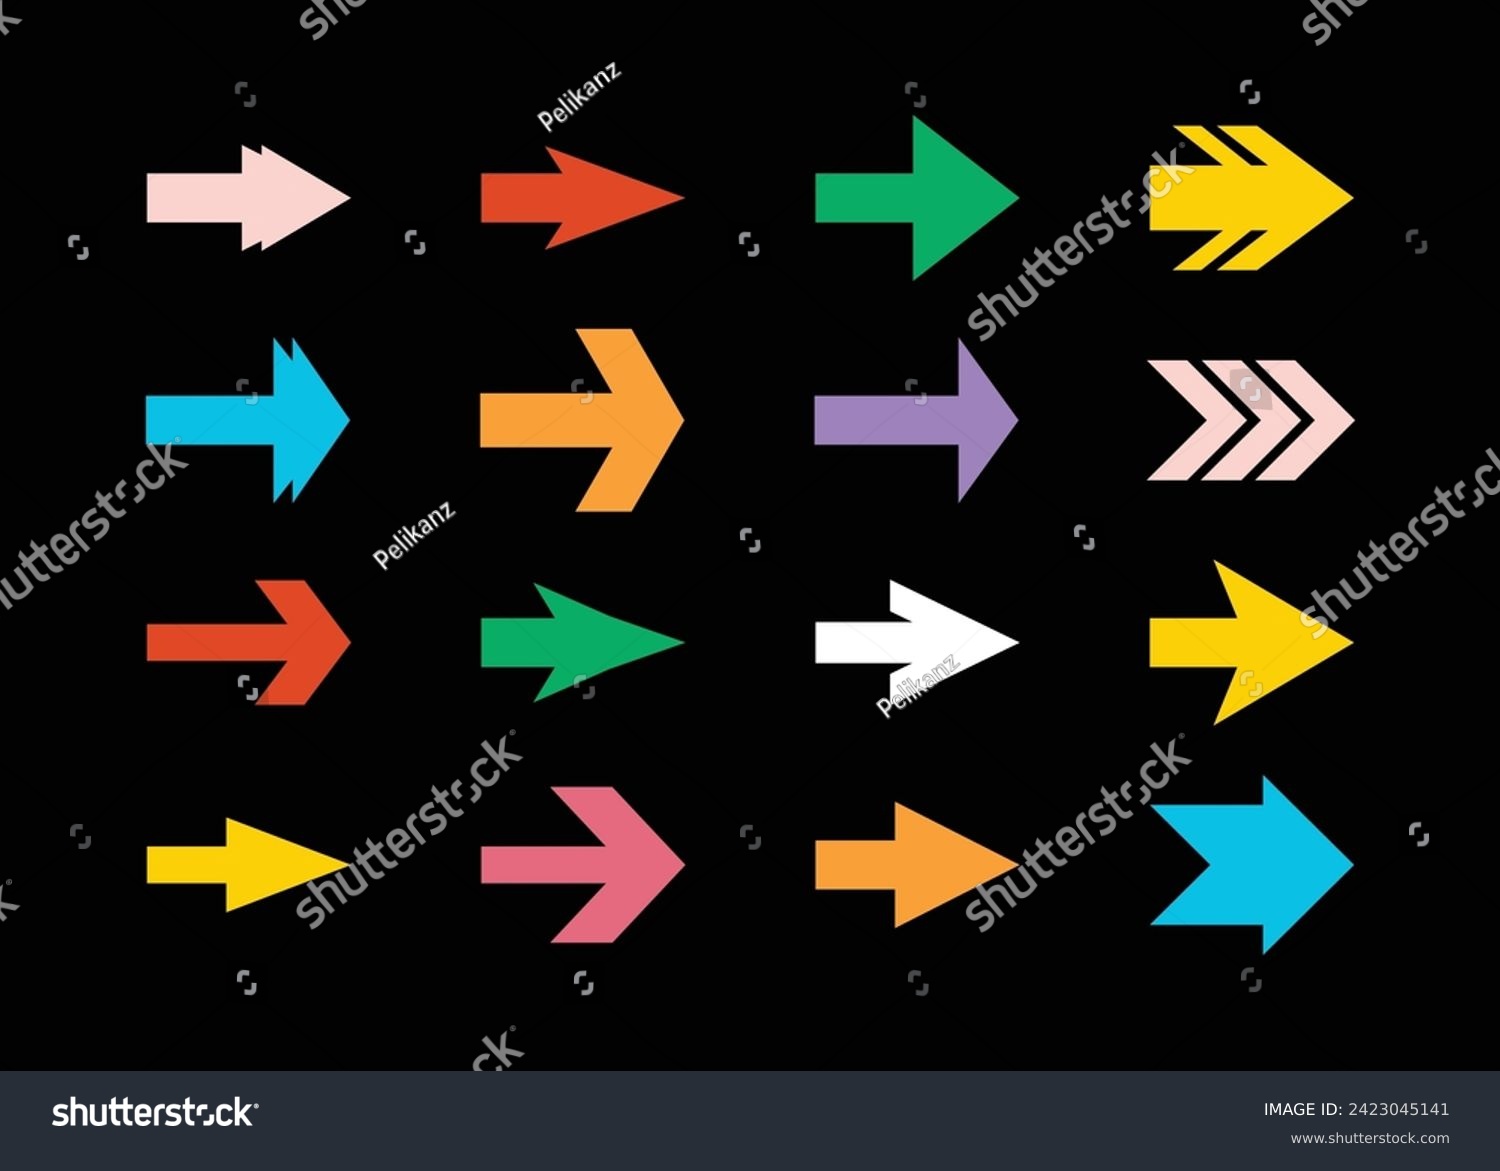 SVG of Trendy colorful isolated pointy sharp edge direction arrows icons design element set with different shapes on black background svg